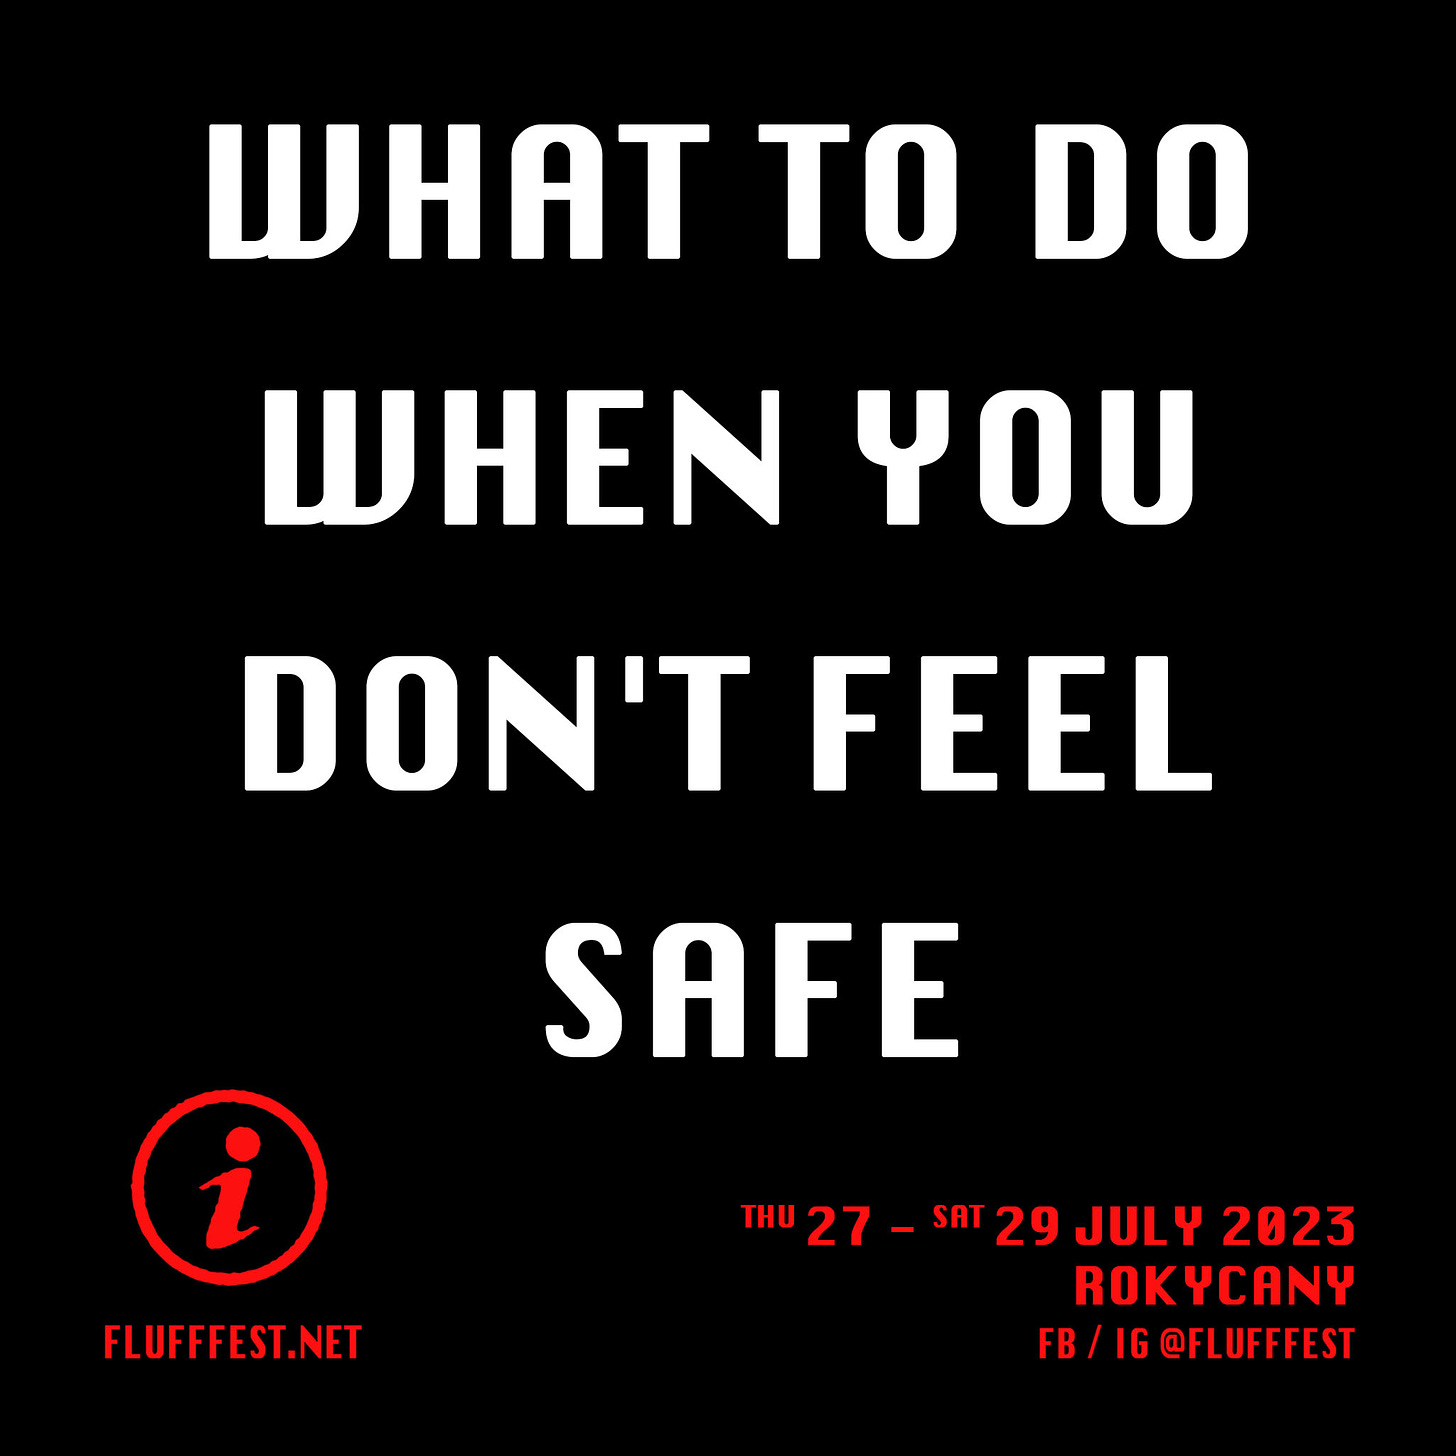 May be an image of text that says 'WHAT TO DO WHEN YOU DON'T FEEL SAFE i THU 27 FLUFFFEST.NET SAT 29 JULY 2023 ROKYCANY @FLUFFFEST'